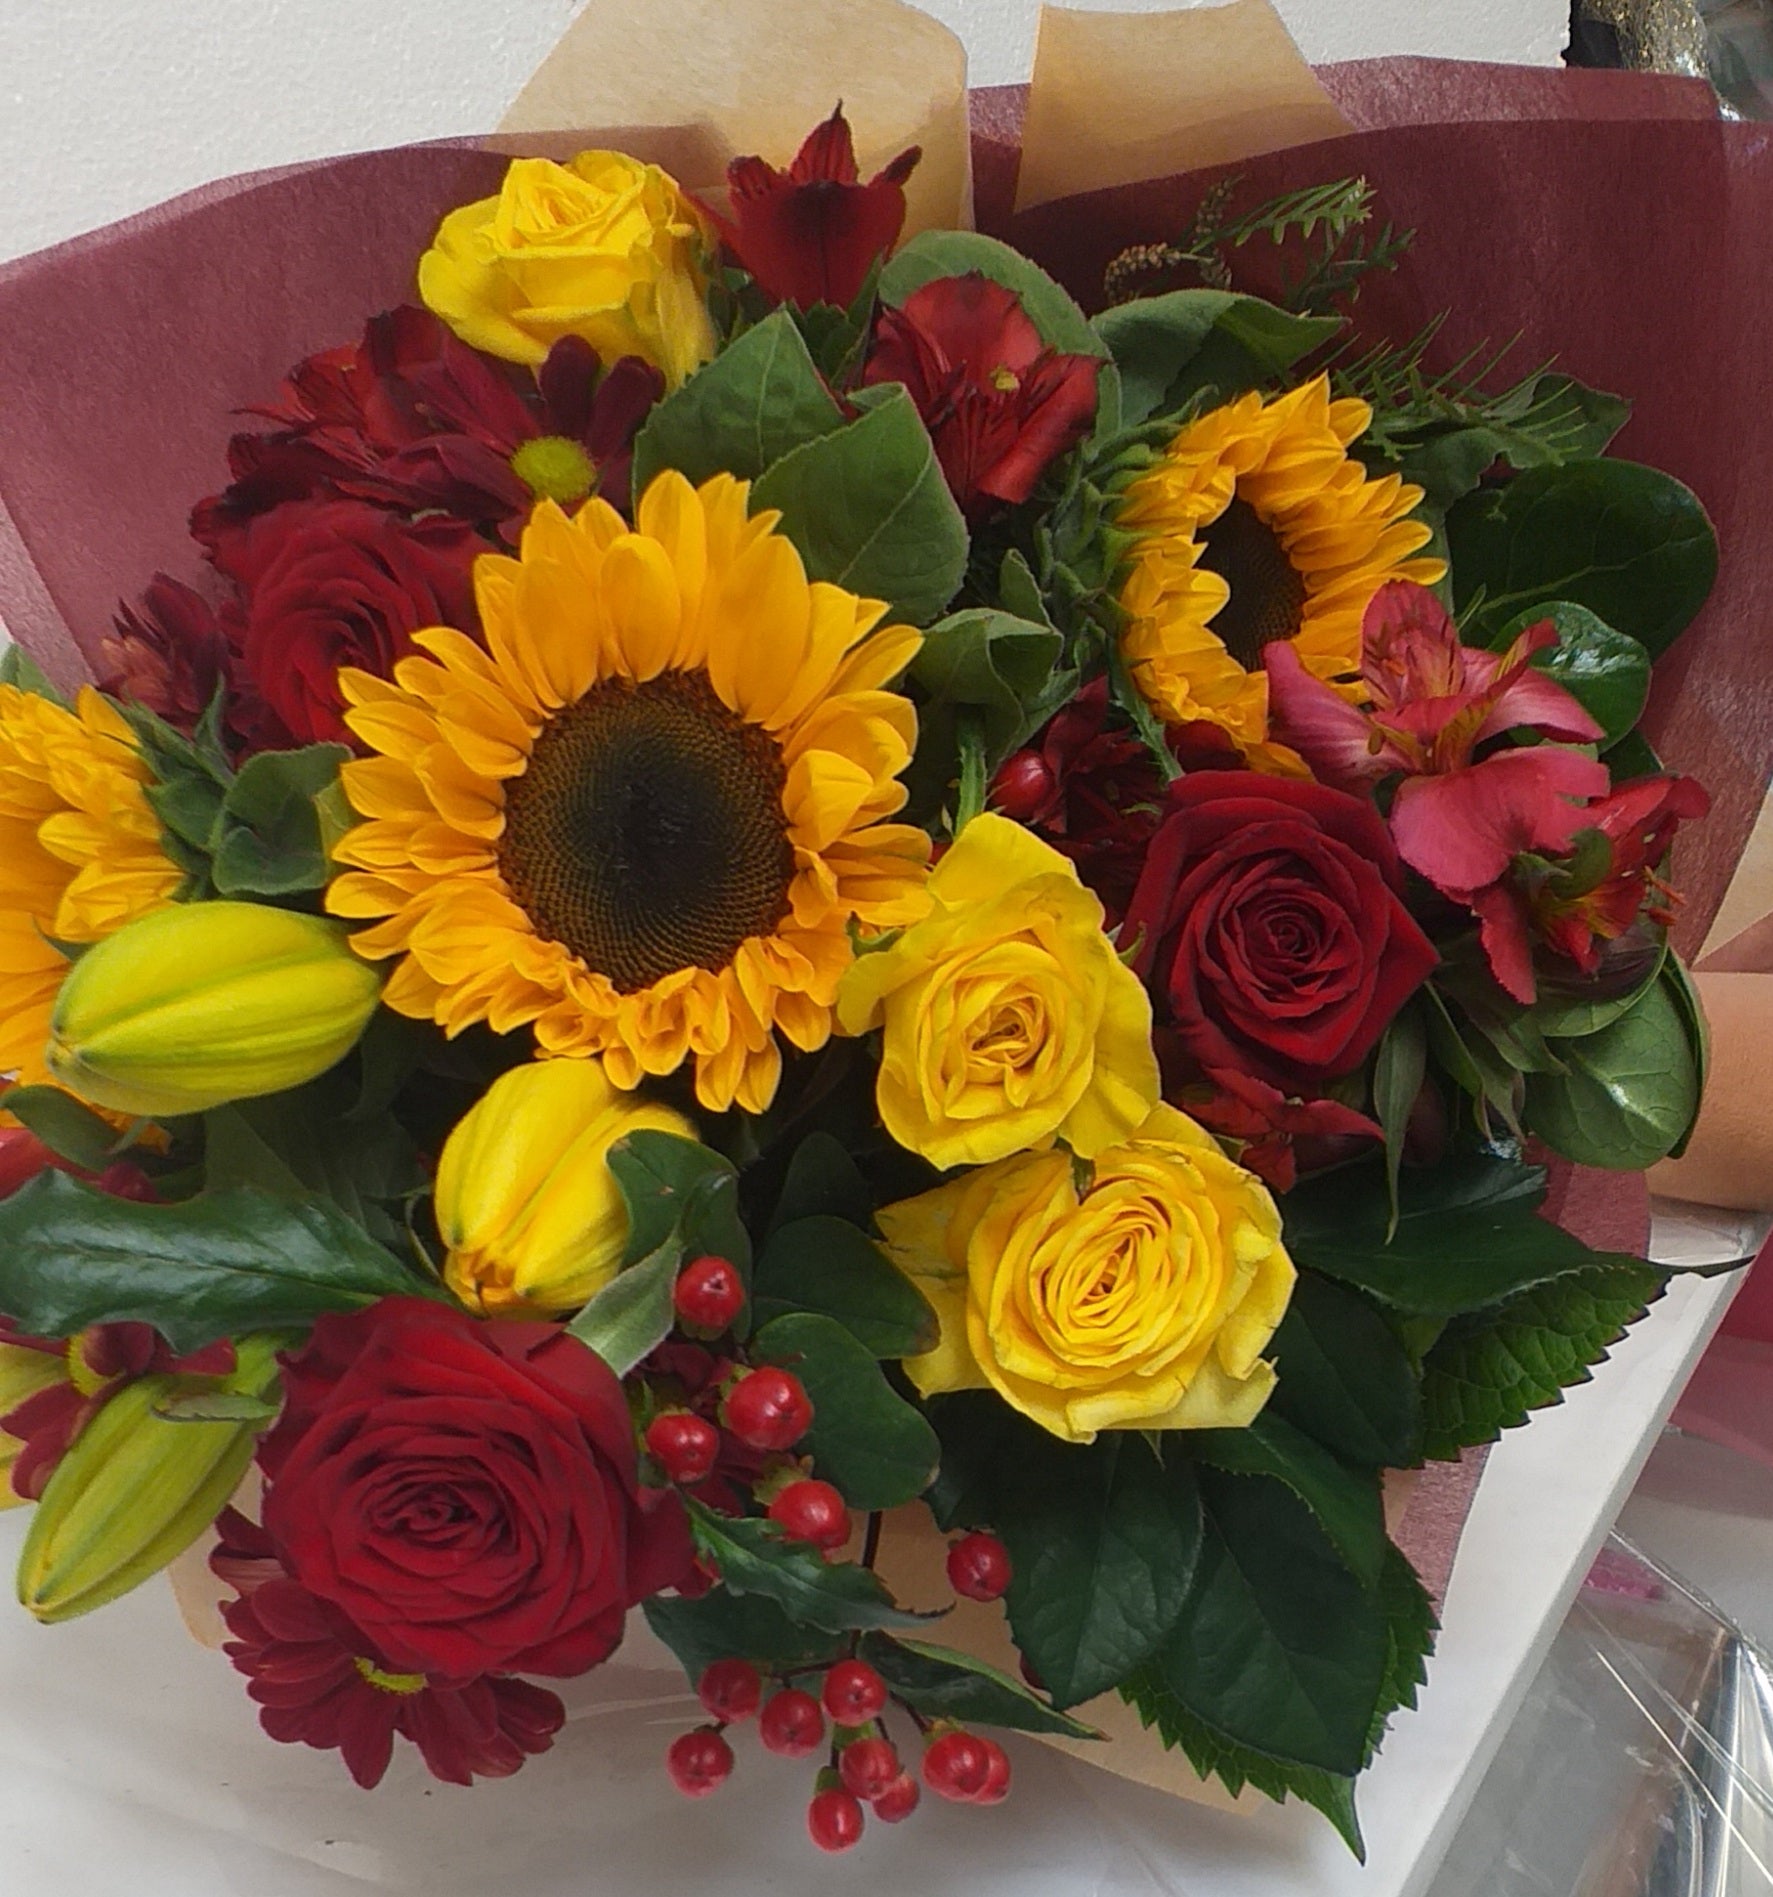 Flower Bouquet, Sunflowers and Roses or your choice, alstro, lillies, pink, red, yellow - Broadfield Flowers Florist Lincoln